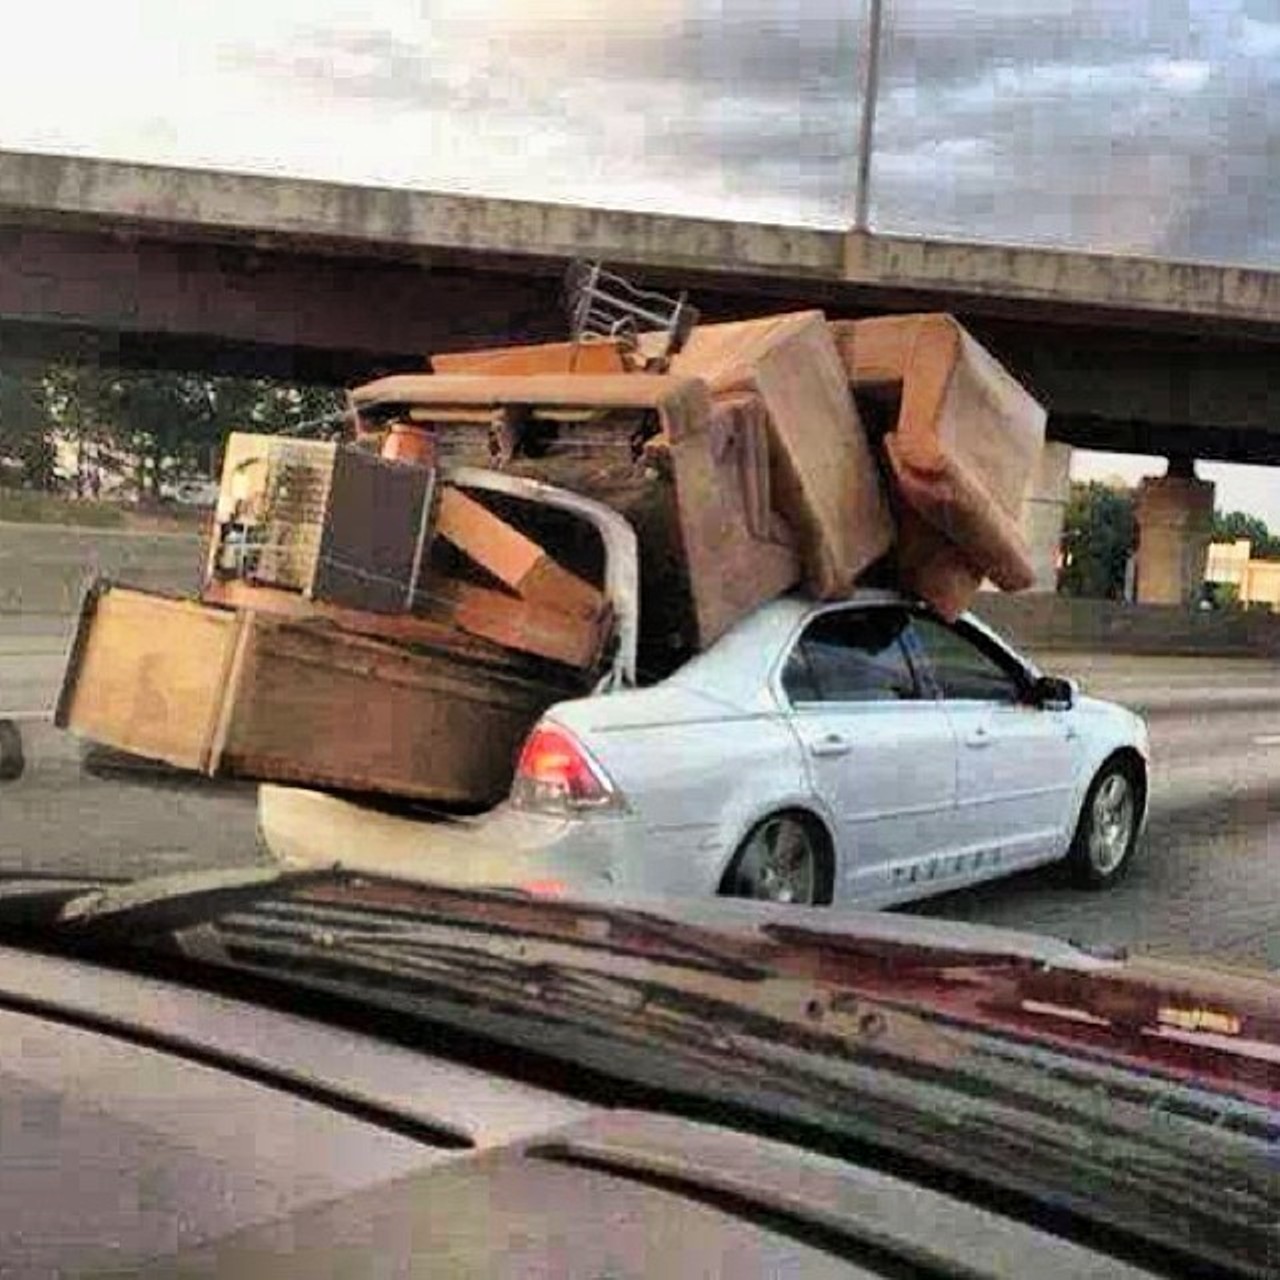 #onlyincleveland will we refuse to rent a moving truck.